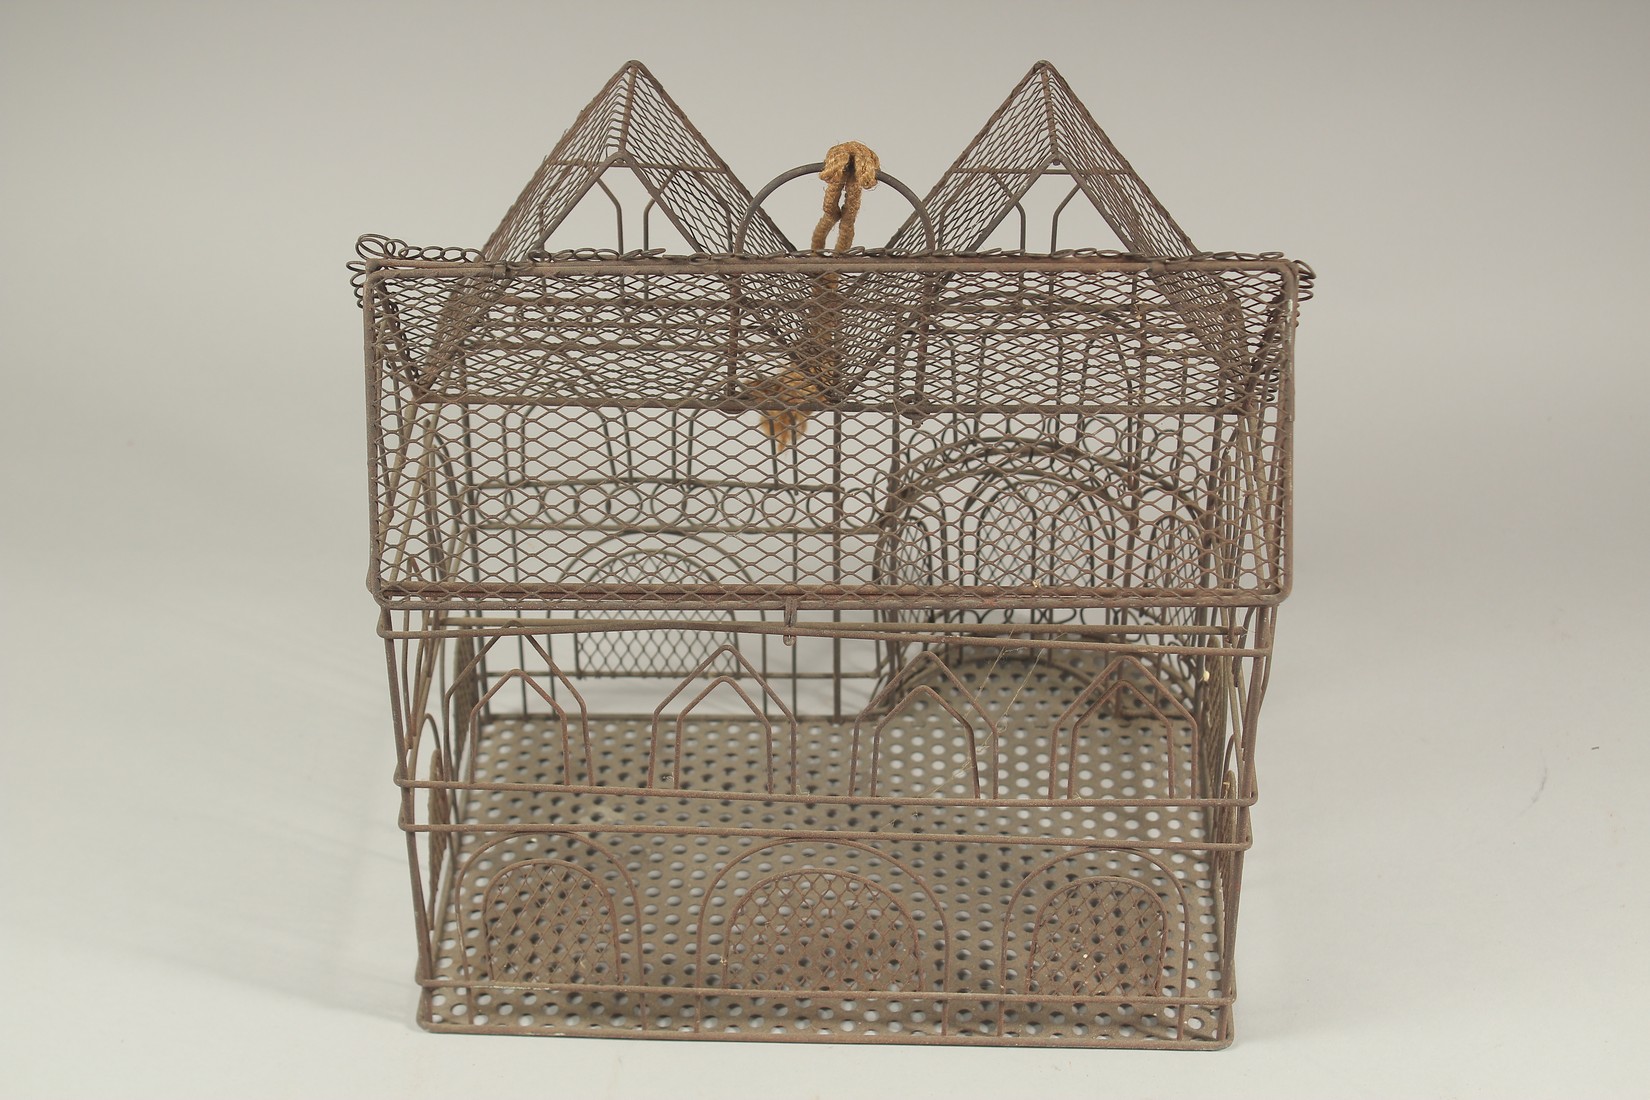 A WIRE WORK BIRD CAGE HOUSE. 12ins high x 11 ins long. - Image 3 of 4